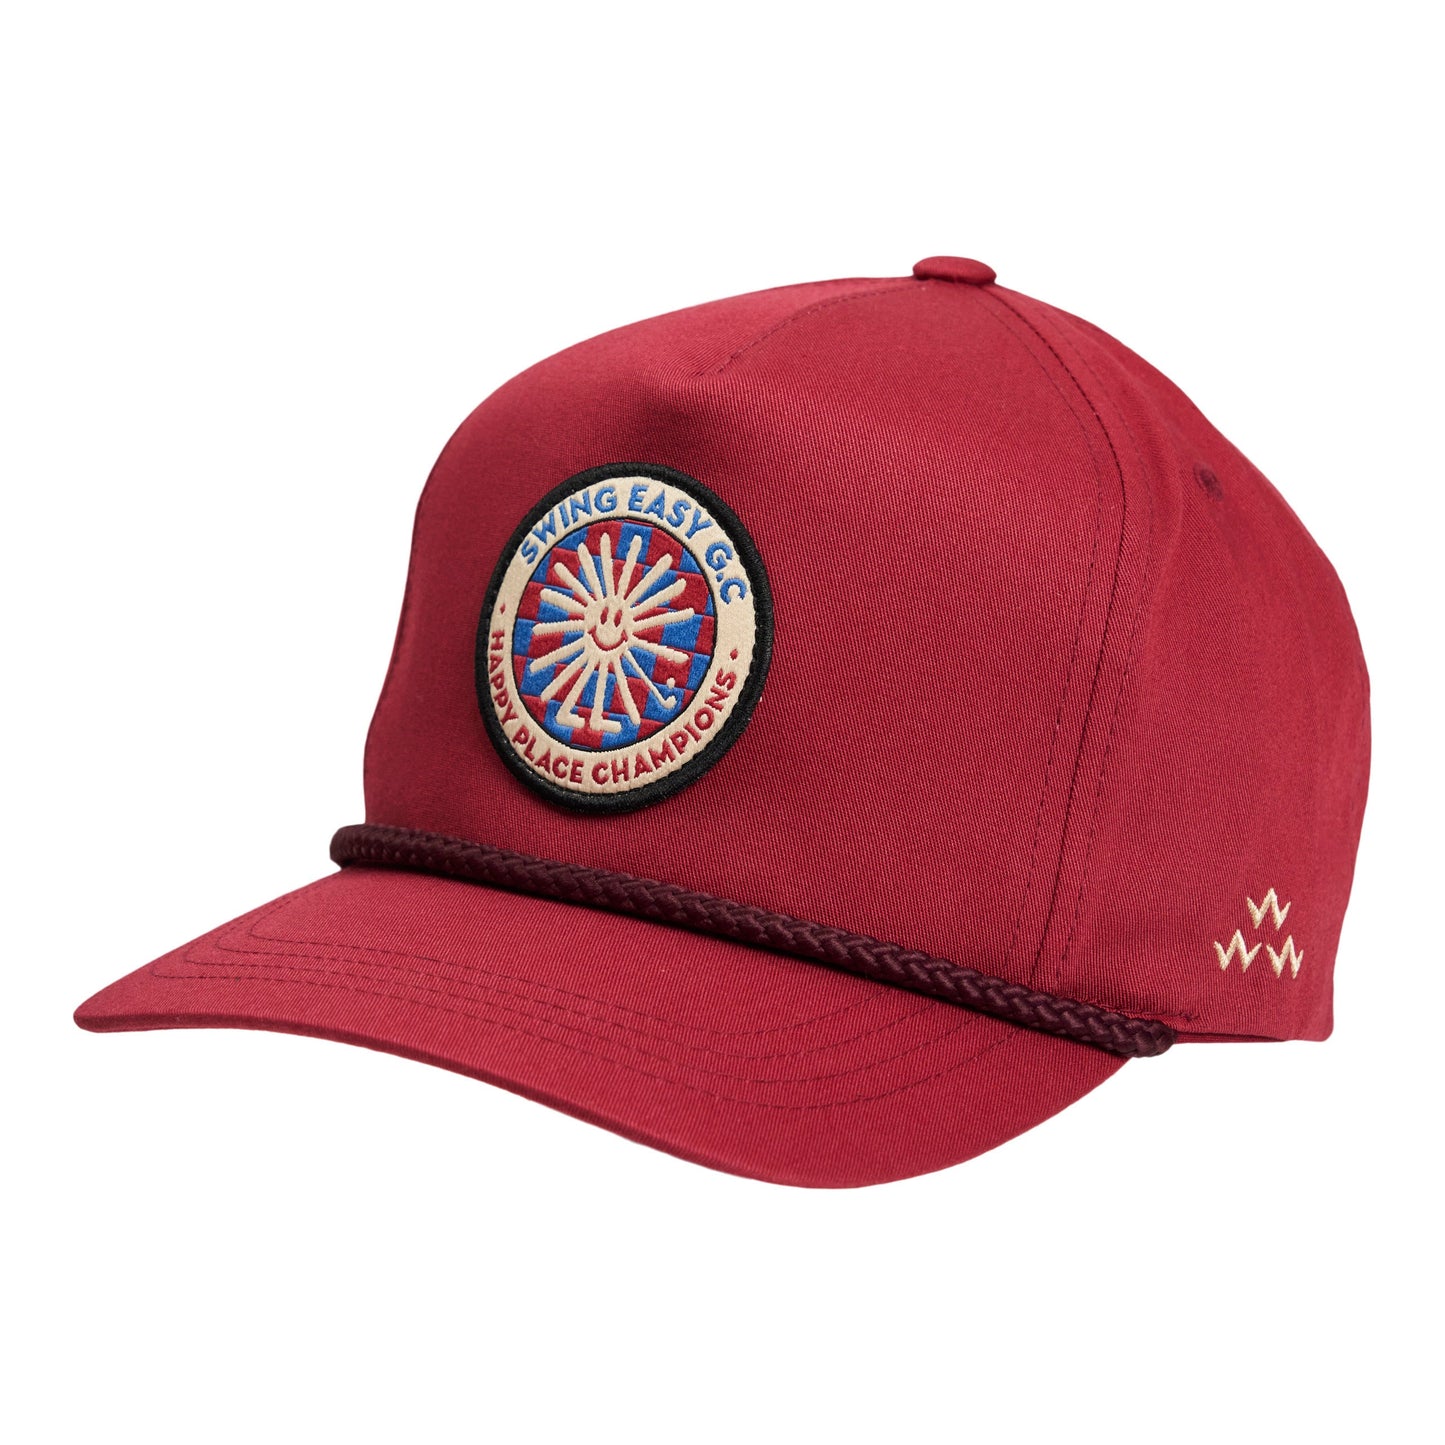 birds-of-condor-burgundy-swing-easy-golf-club-happy-place-champions-fifa-world-cup-football-fly-condor-golf-snapback-hat-cap-front